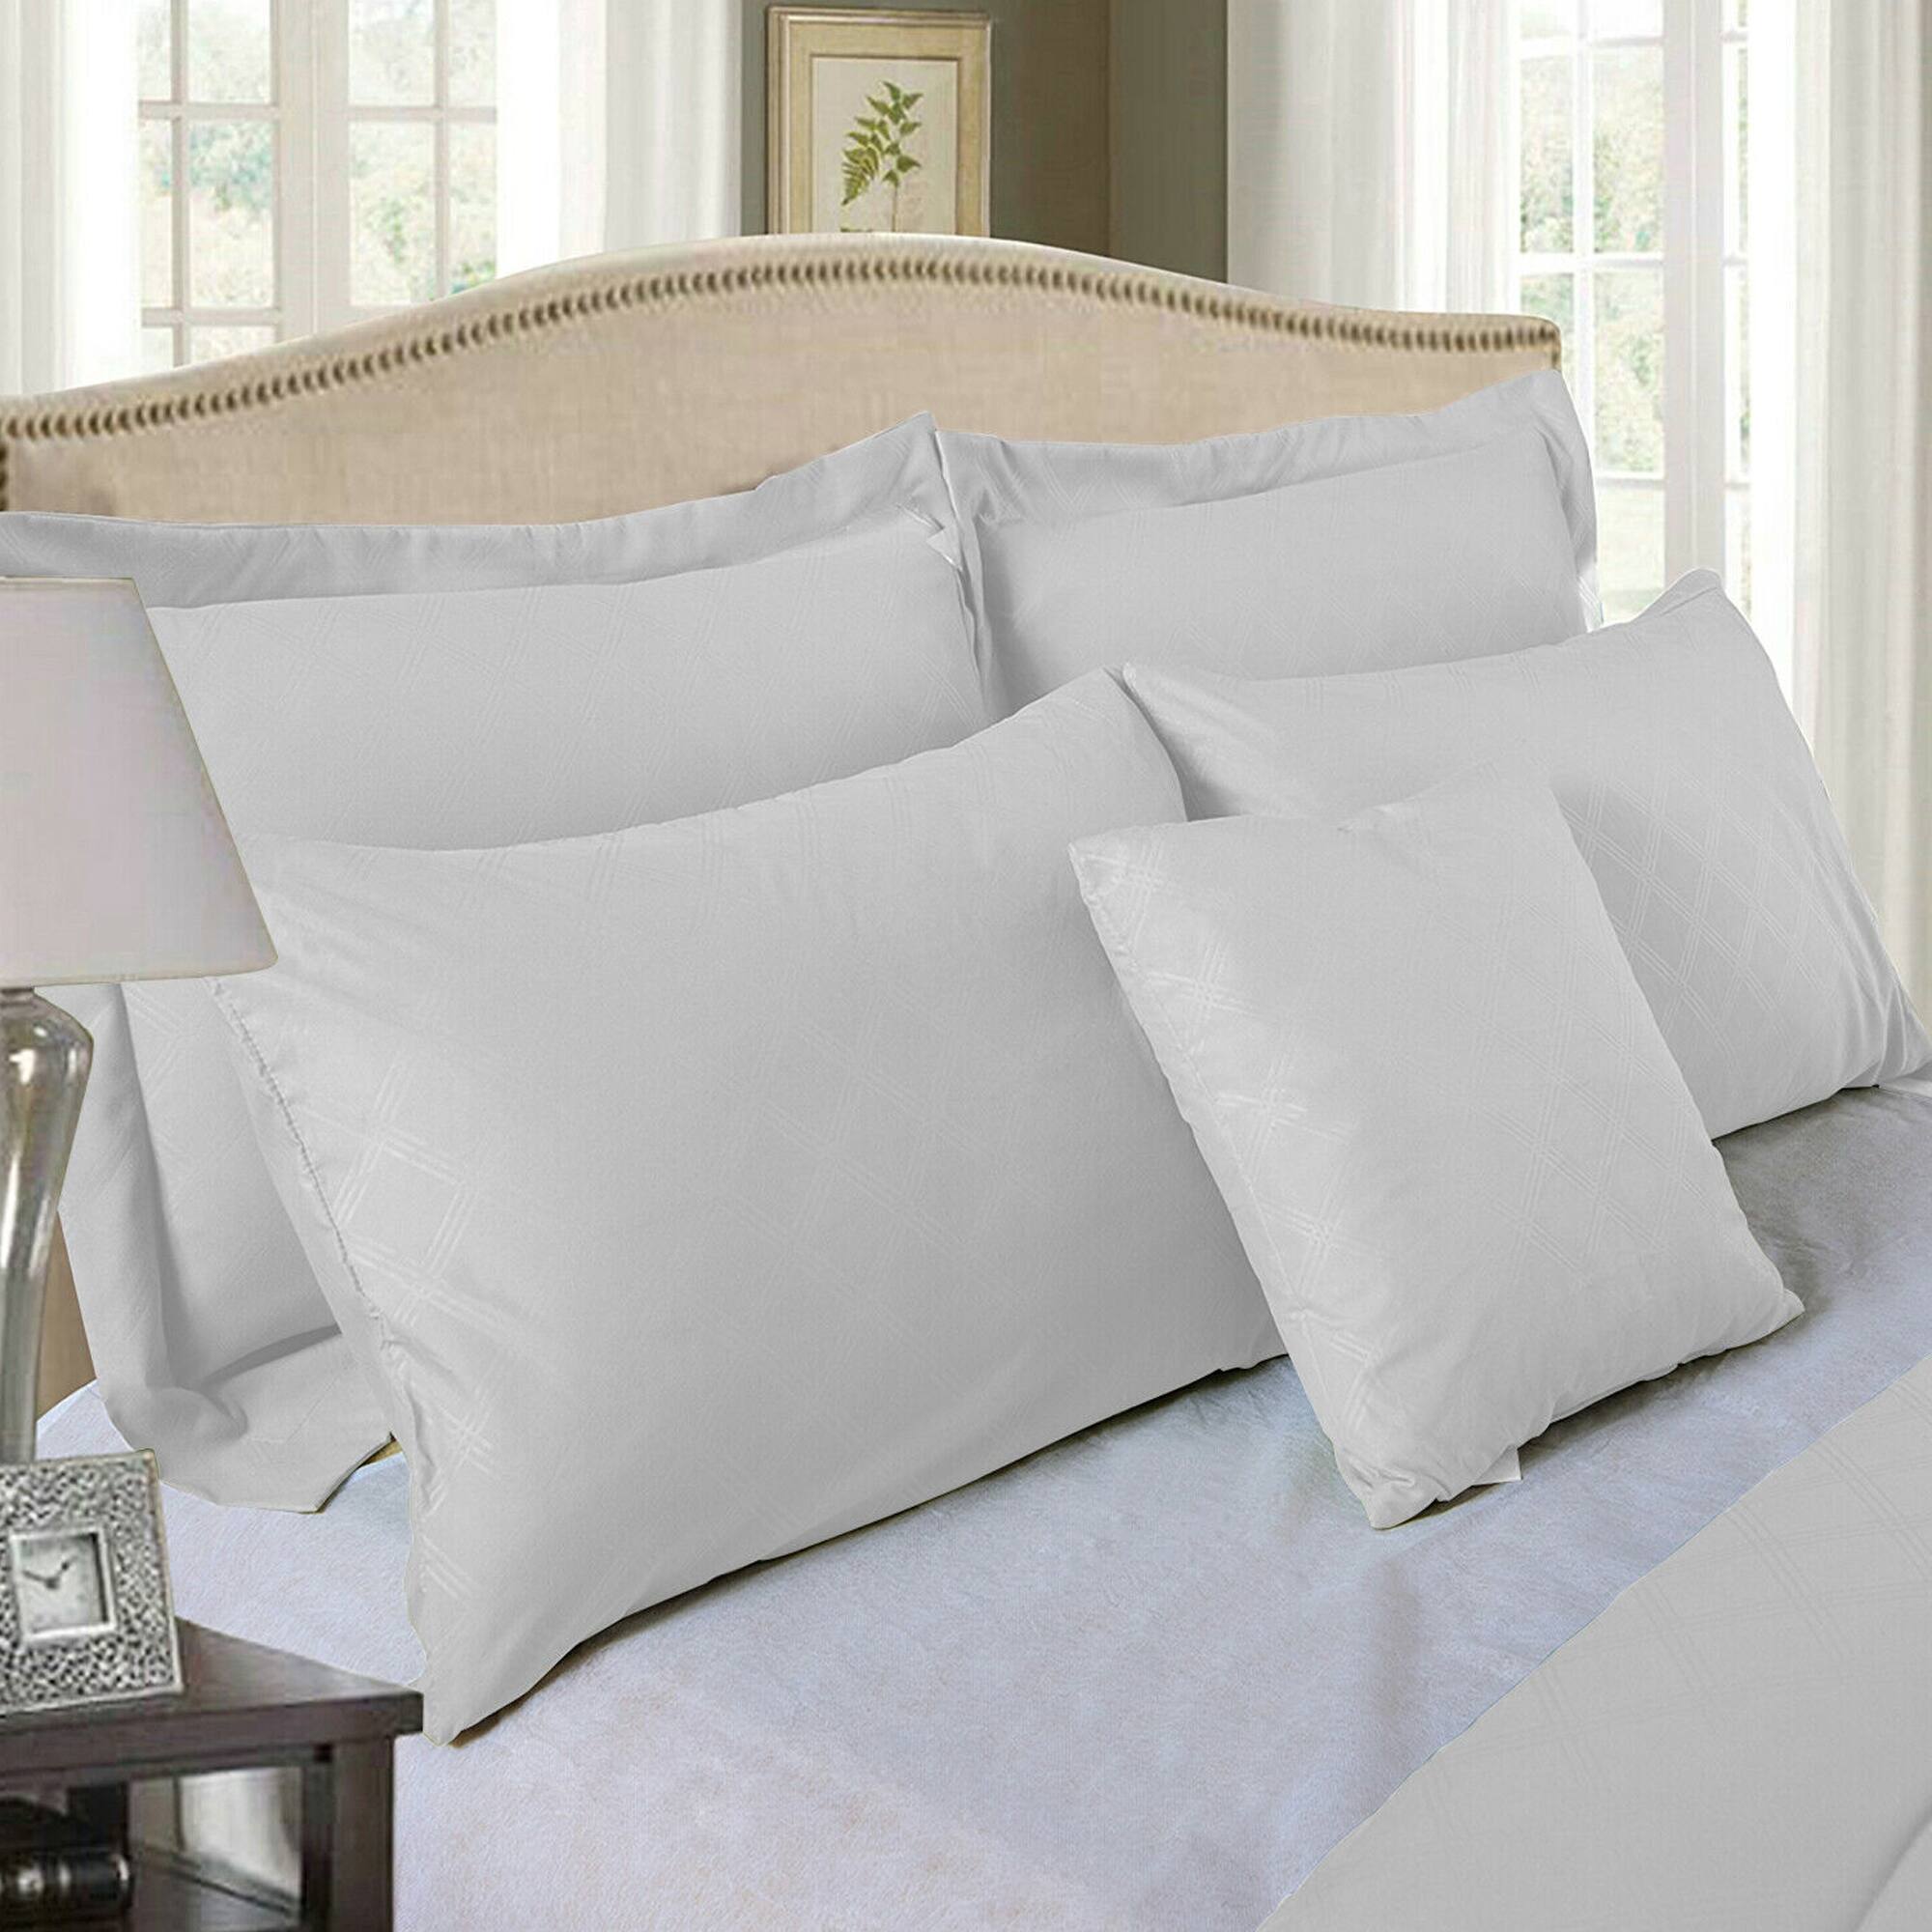 10 Piece Bed In A Bag Comforter Set Plaid Embossed King White